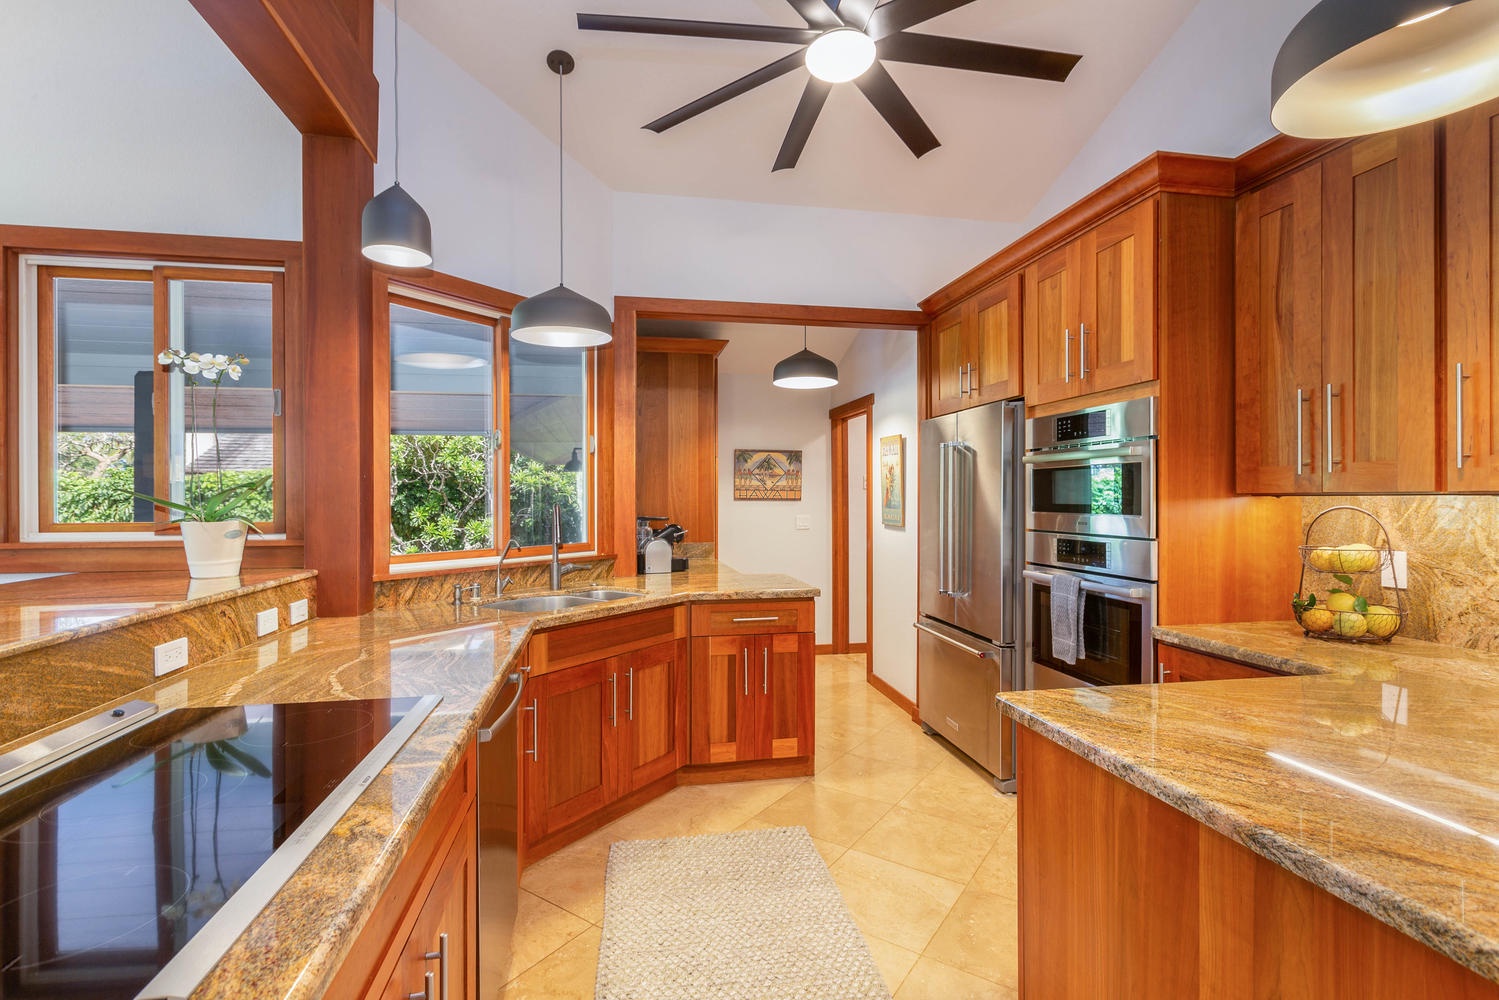 Princeville Vacation Rentals, Makana Lei - Beautiful cabinetry and stainless appliances